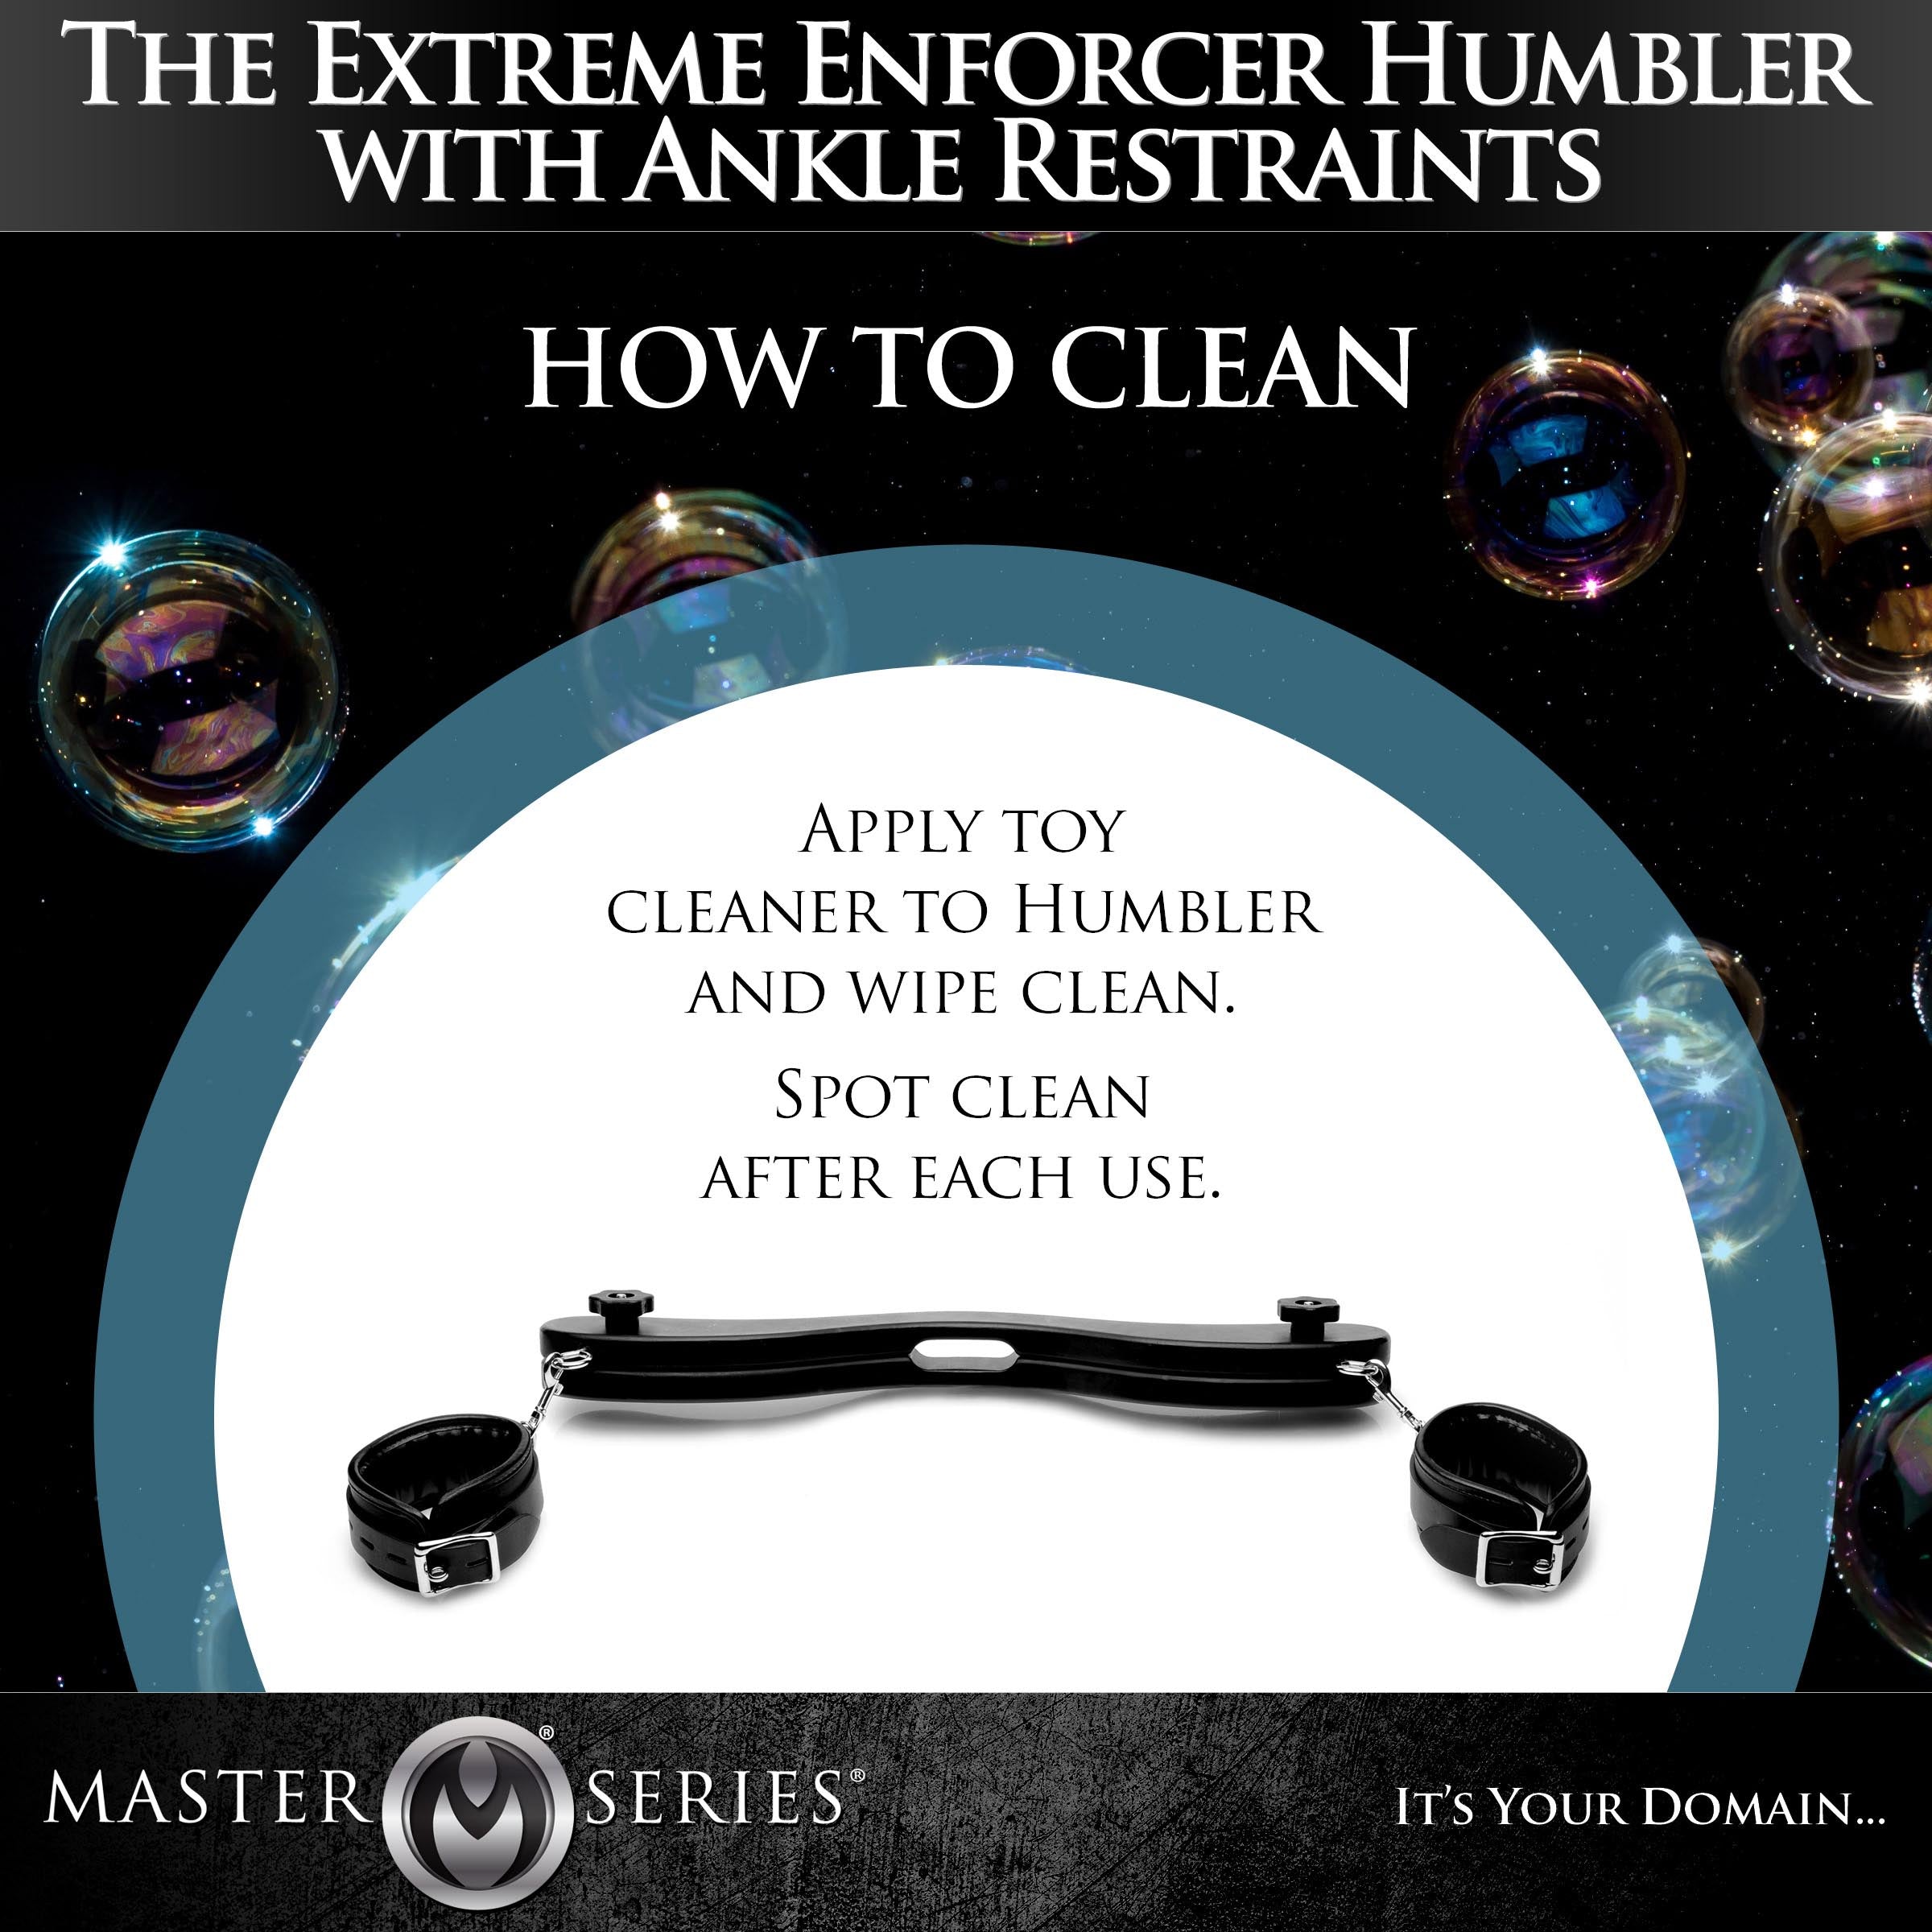 The Extreme Enforcer Humbler with Ankle Restraints